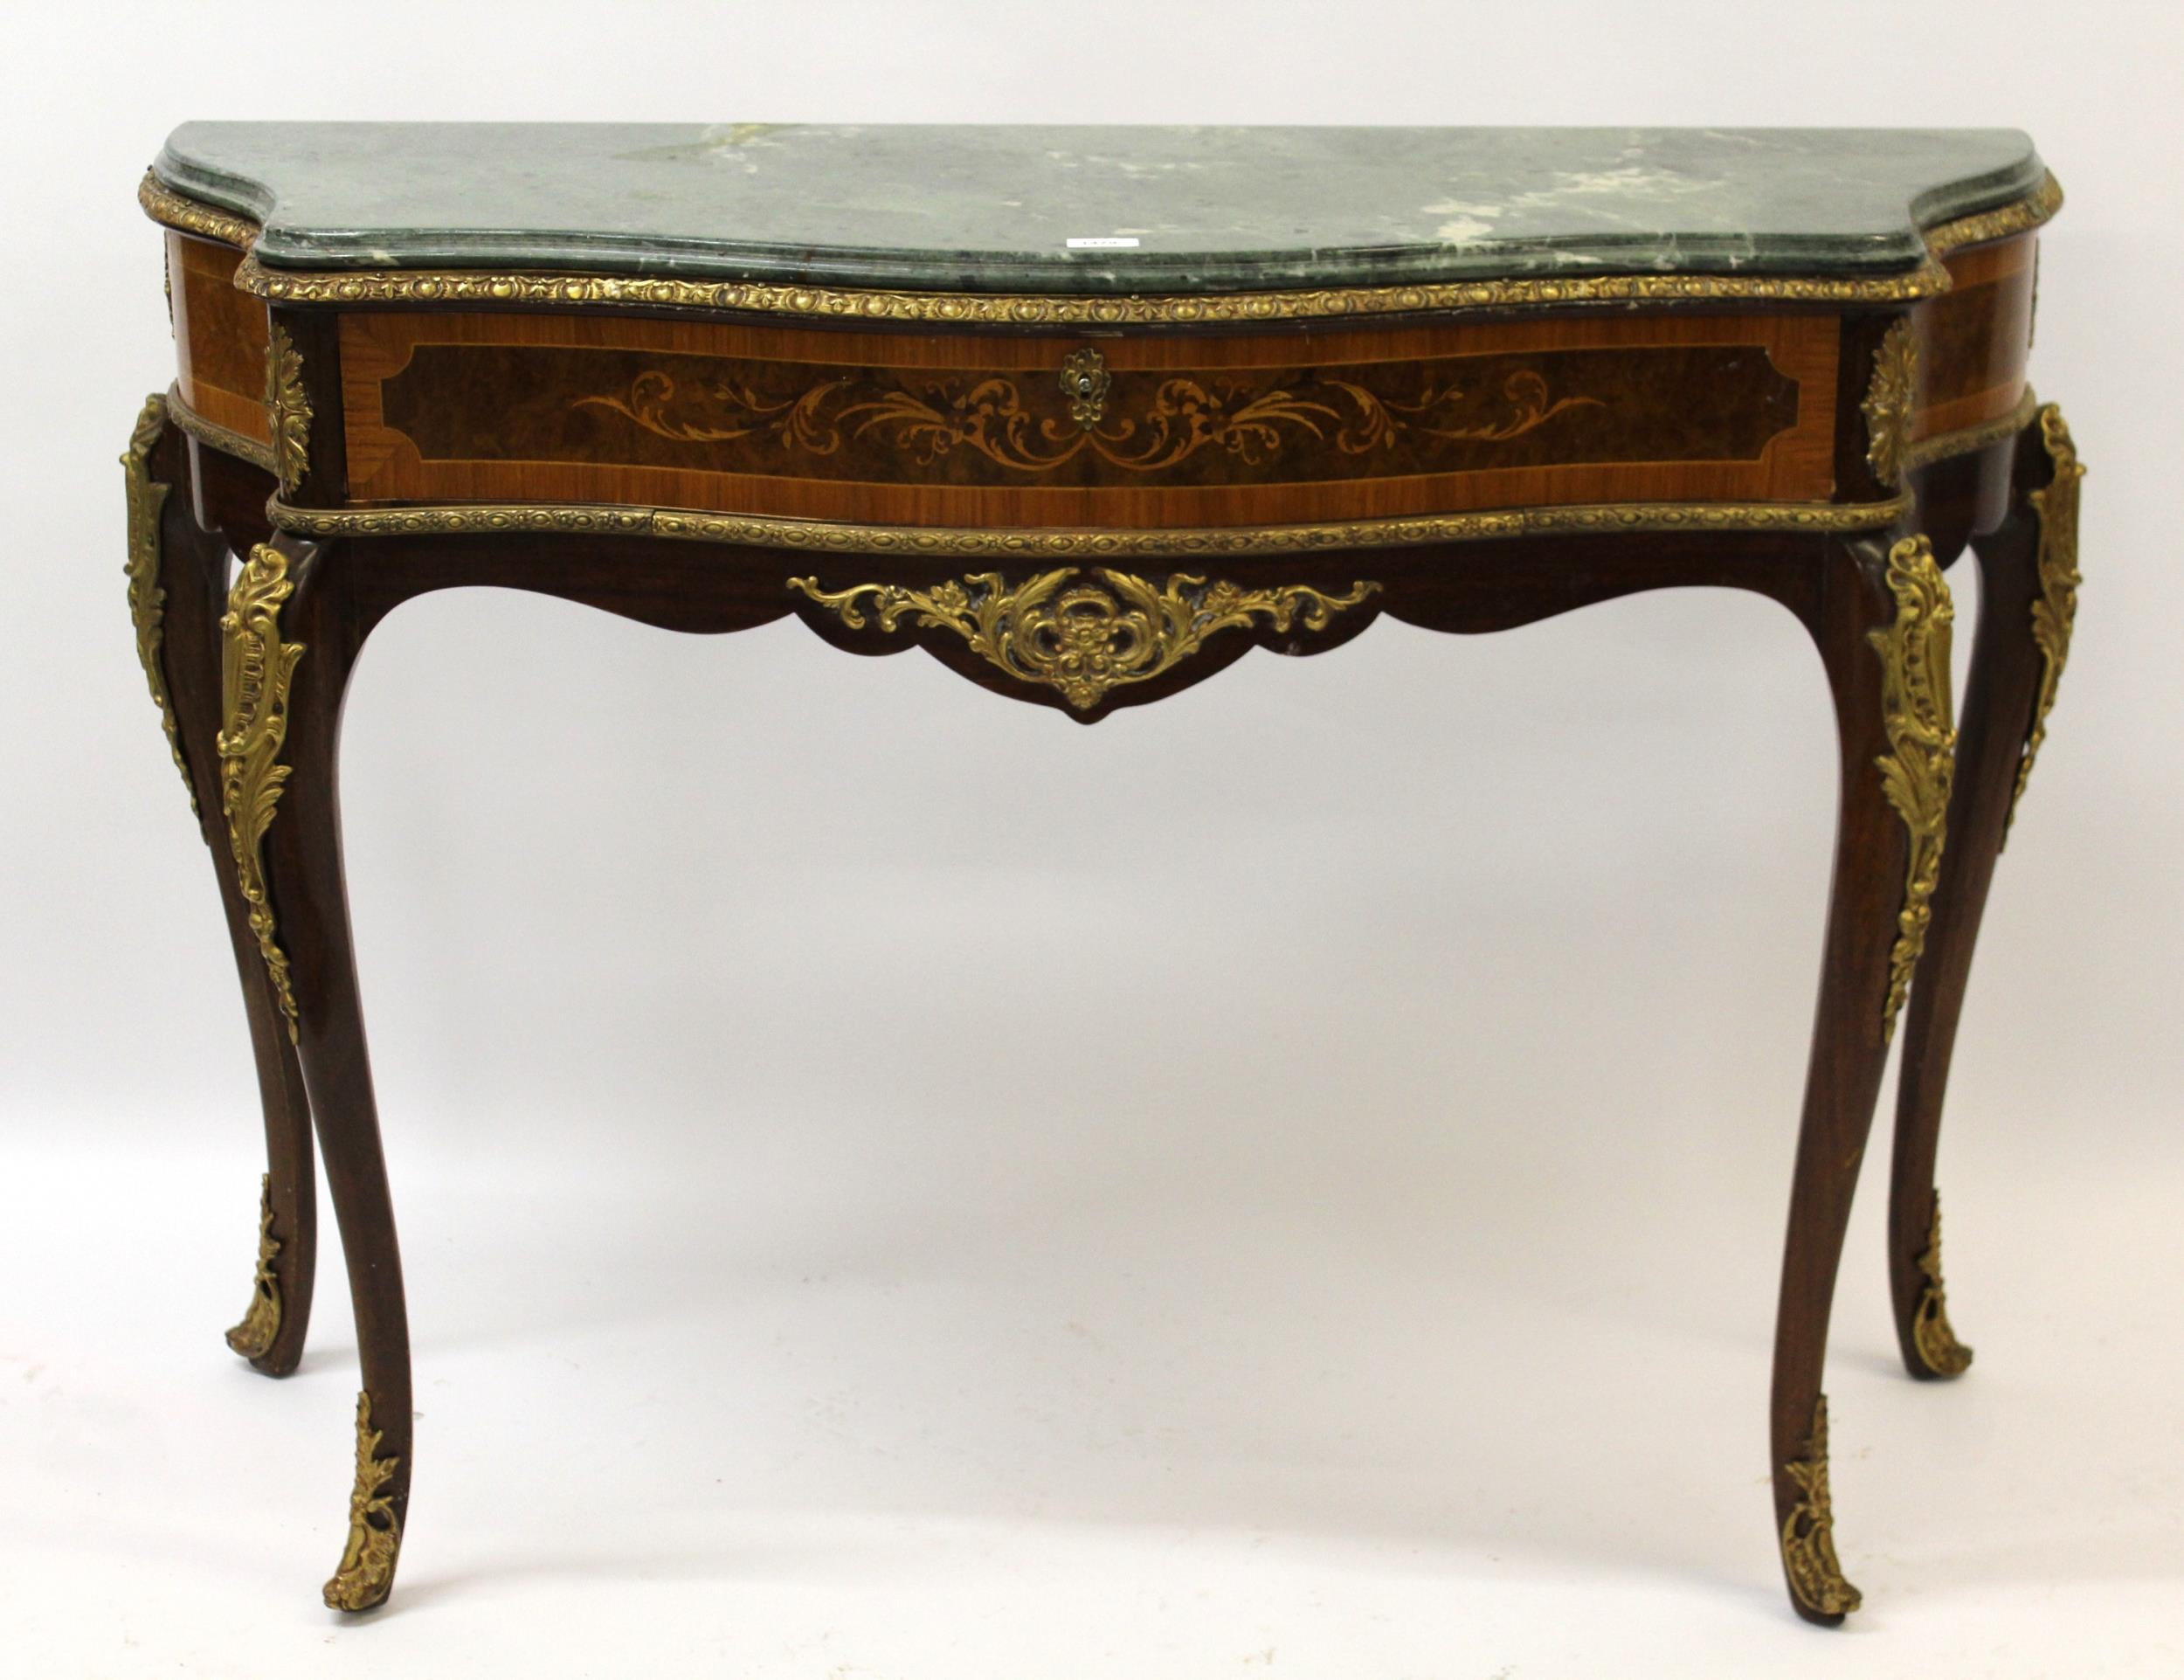 Reproduction French Kingwood marquetry inlaid ormolu mounted console table with a green marble top